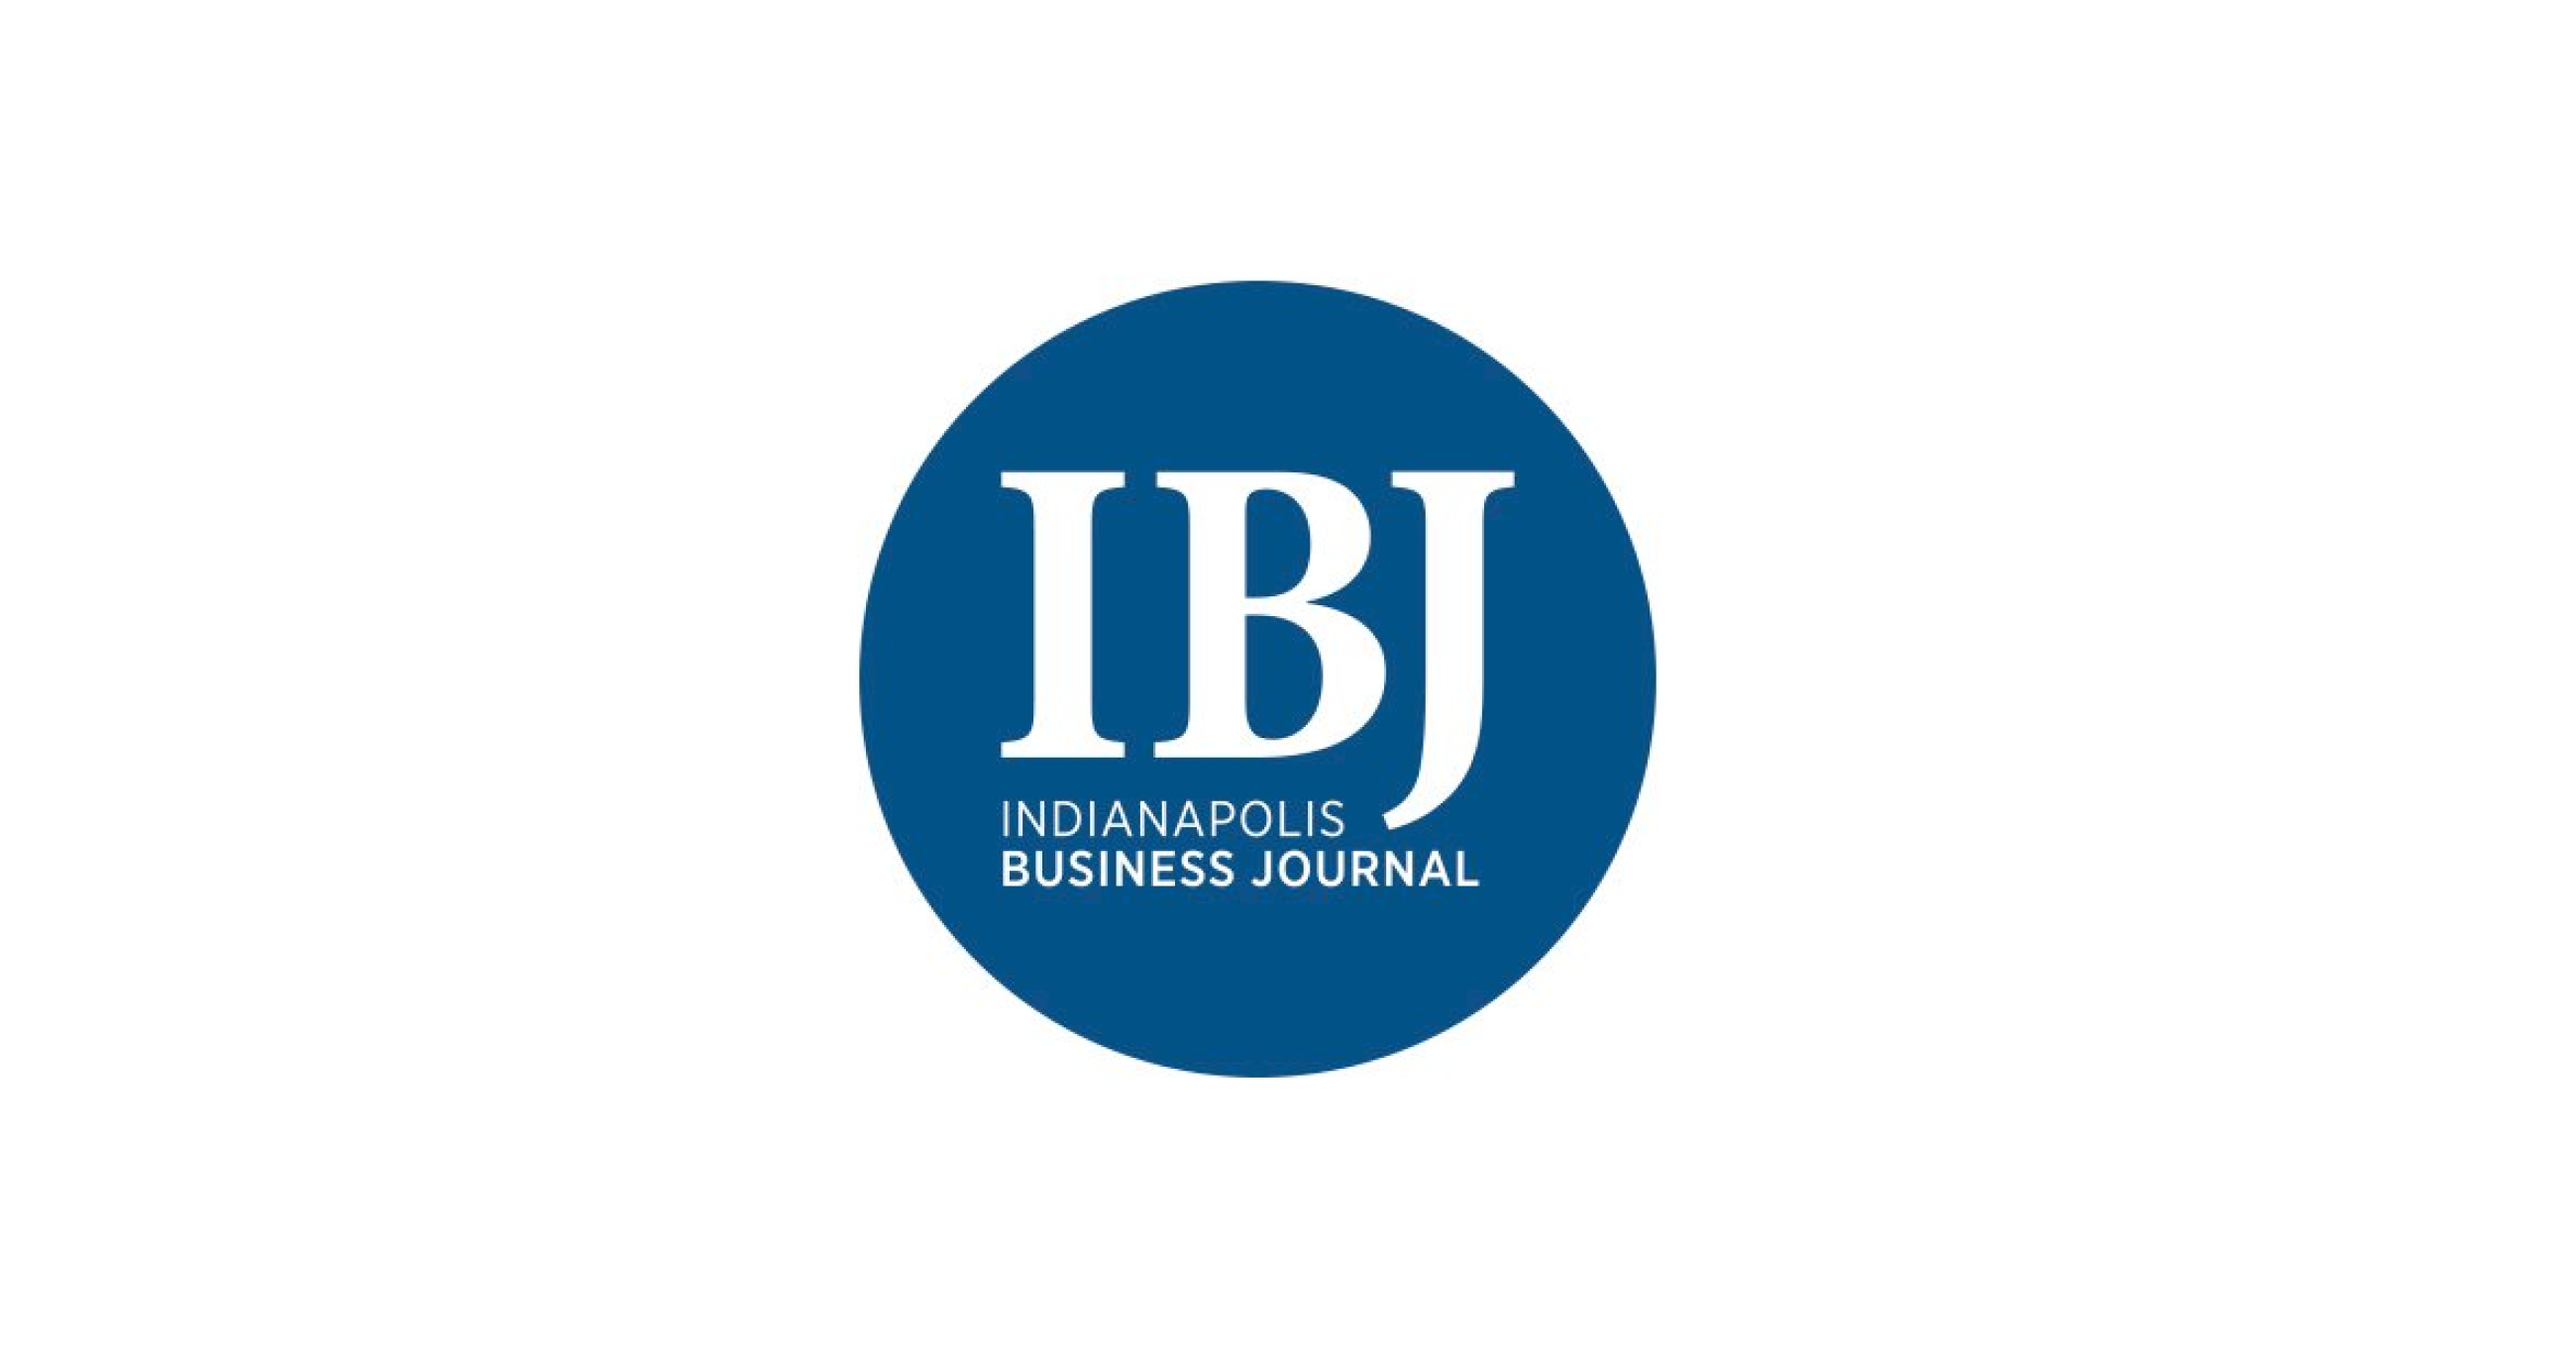 Indiana Business Journal